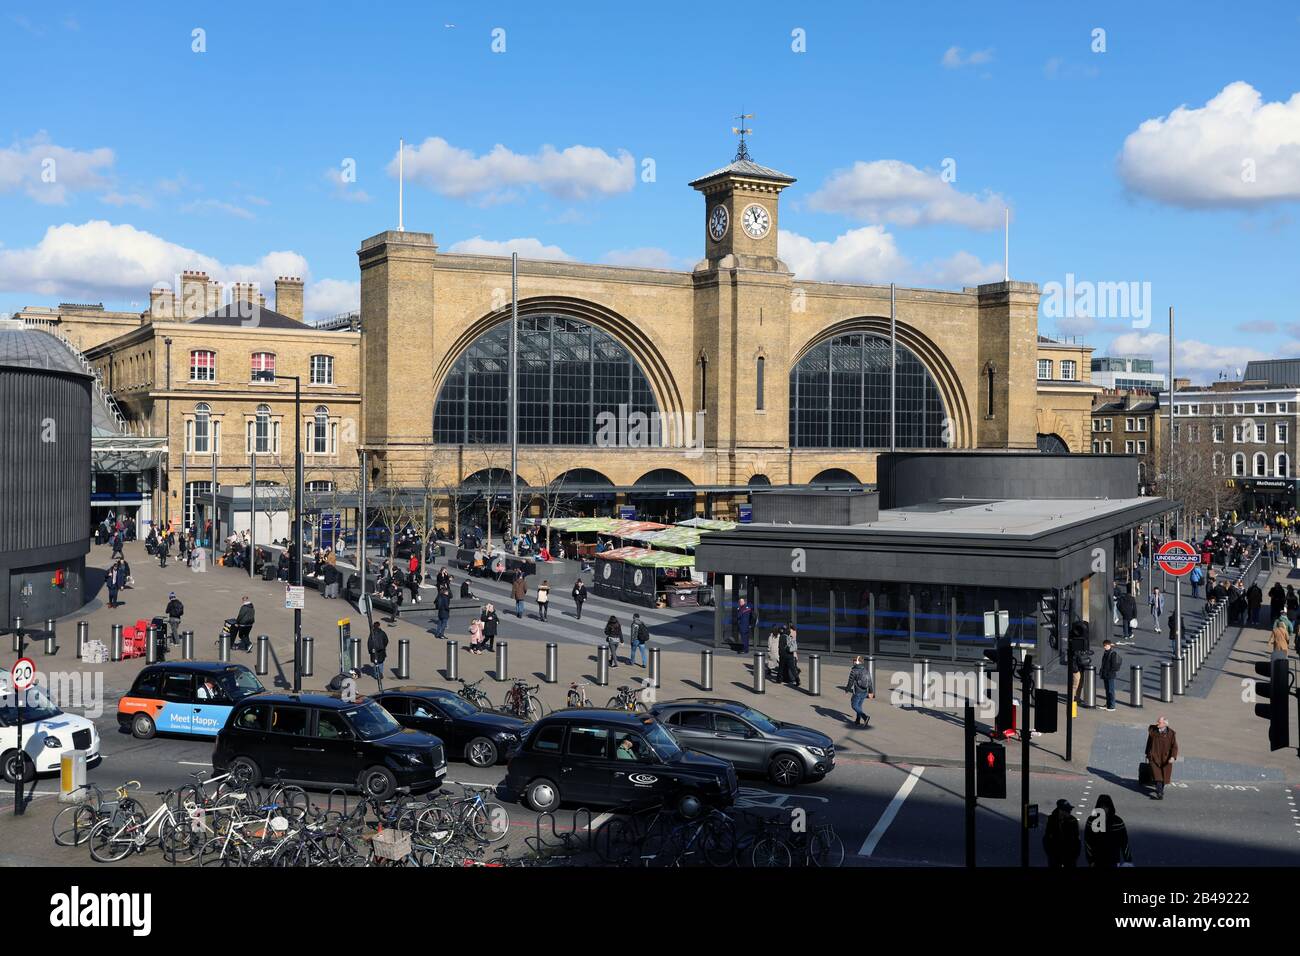 London / UK – March 6, 2020: Exterior of Kings Cross railway station in London Stock Photo